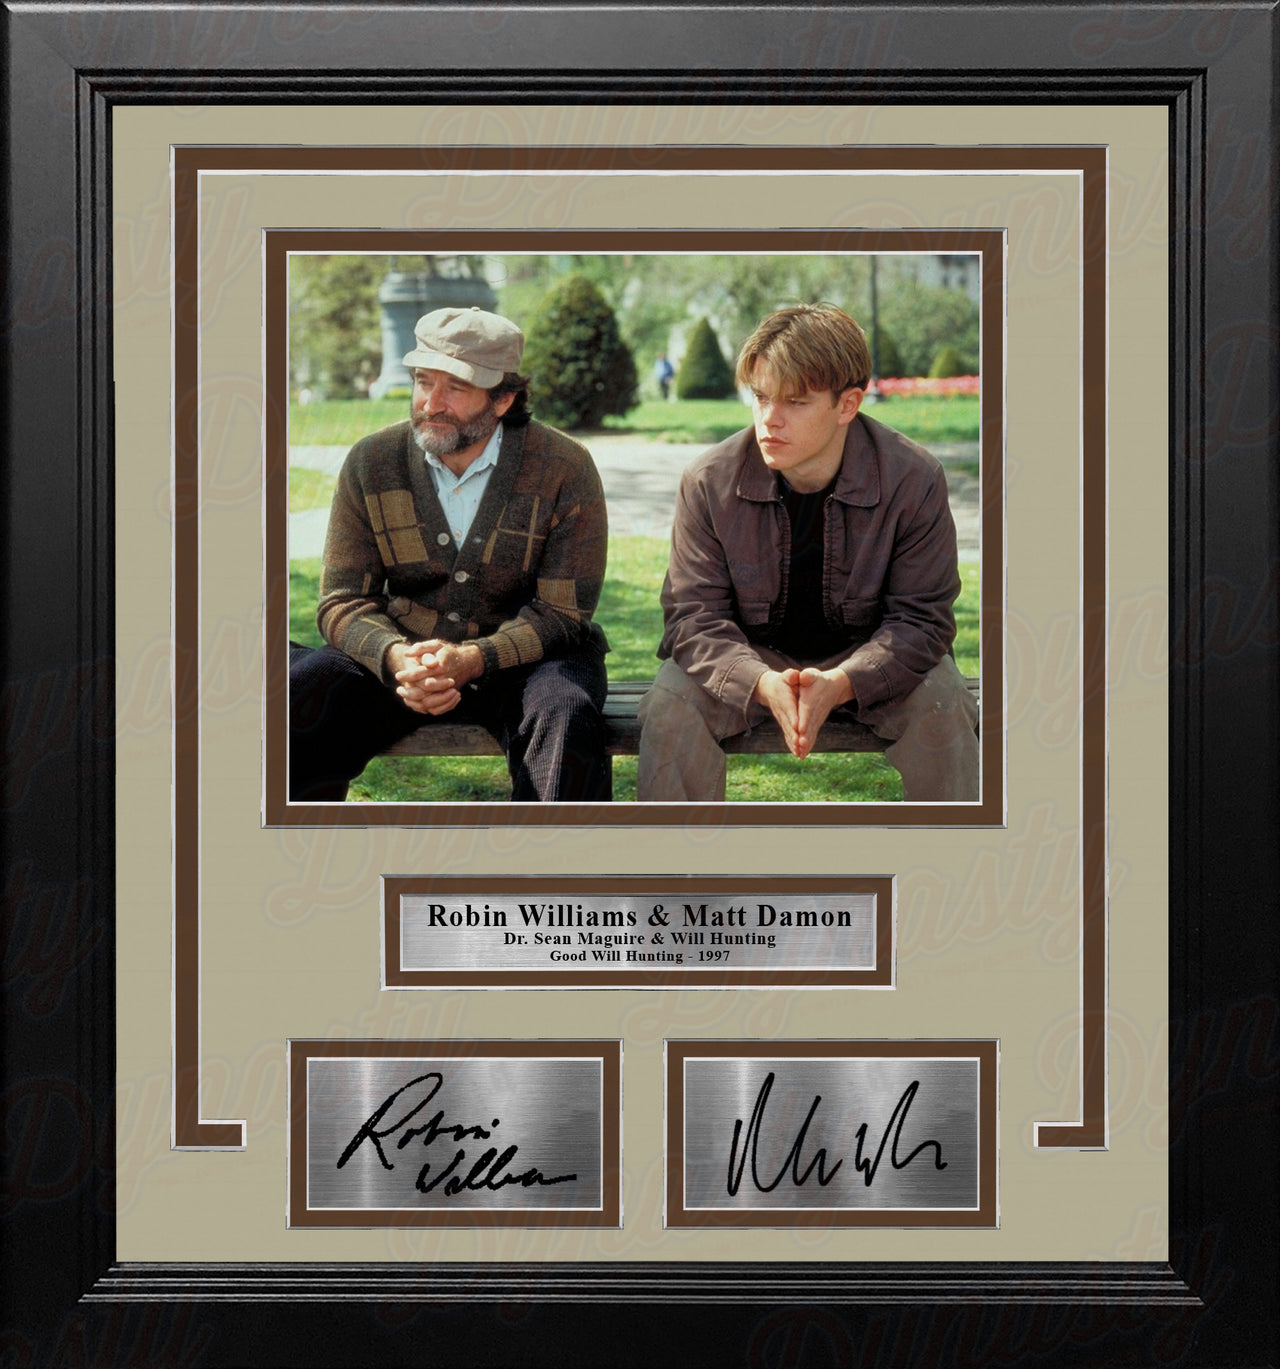 Robin Williams and Matt Damon Good Will Hunting 8" x 10" Framed Photo with Engraved Autographs - Dynasty Sports & Framing 